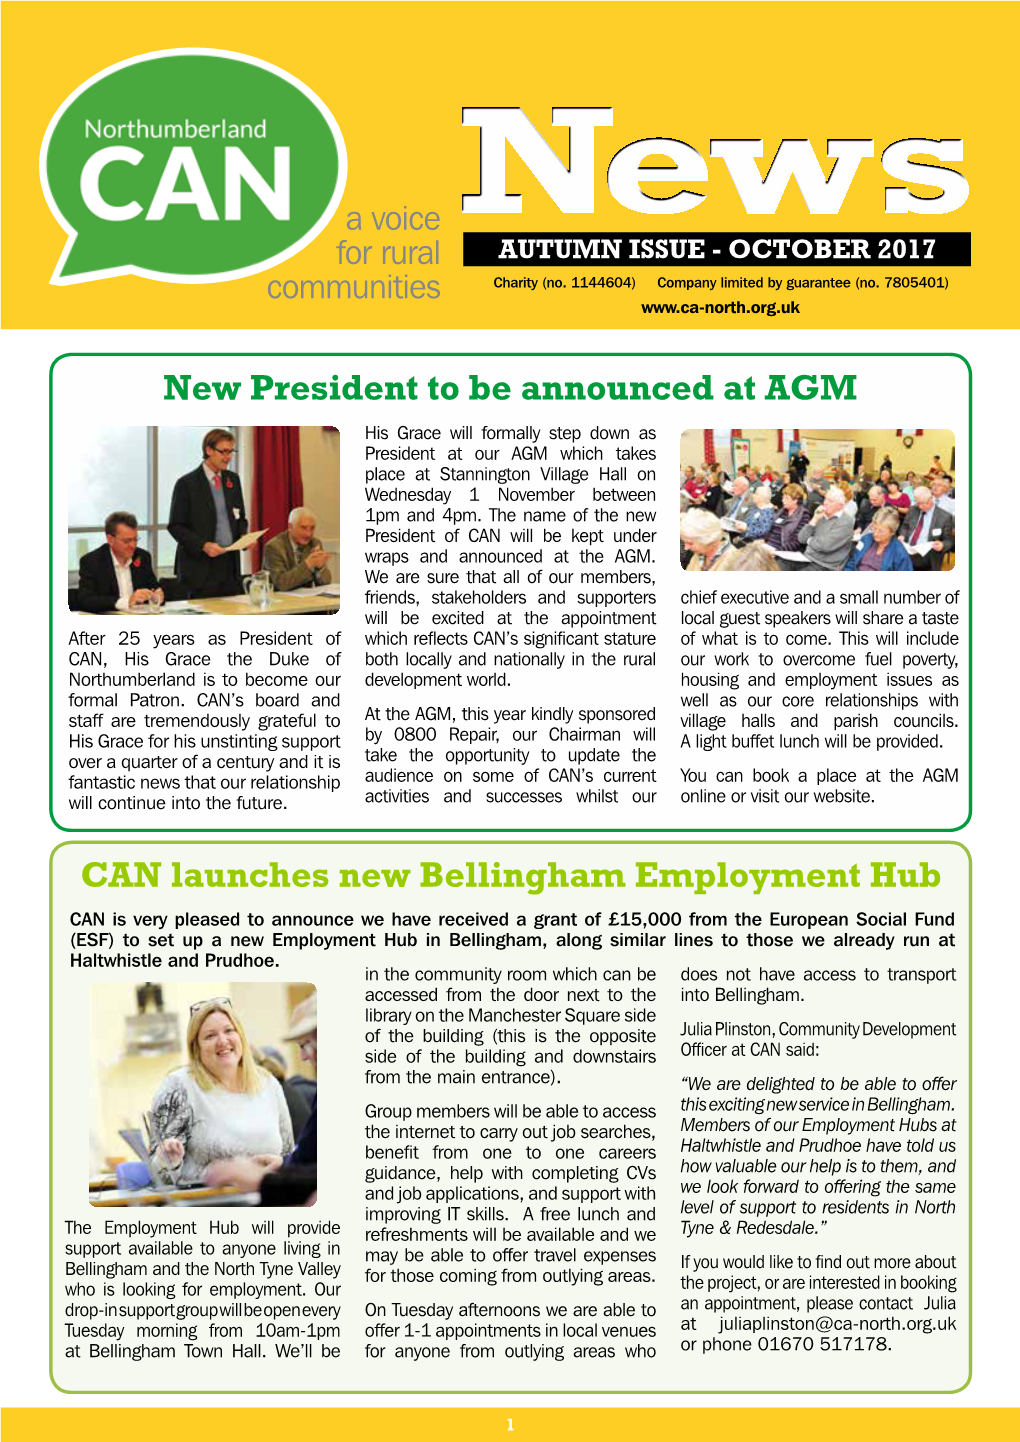 New President to Be Announced at AGM CAN Launches New Bellingham Employment